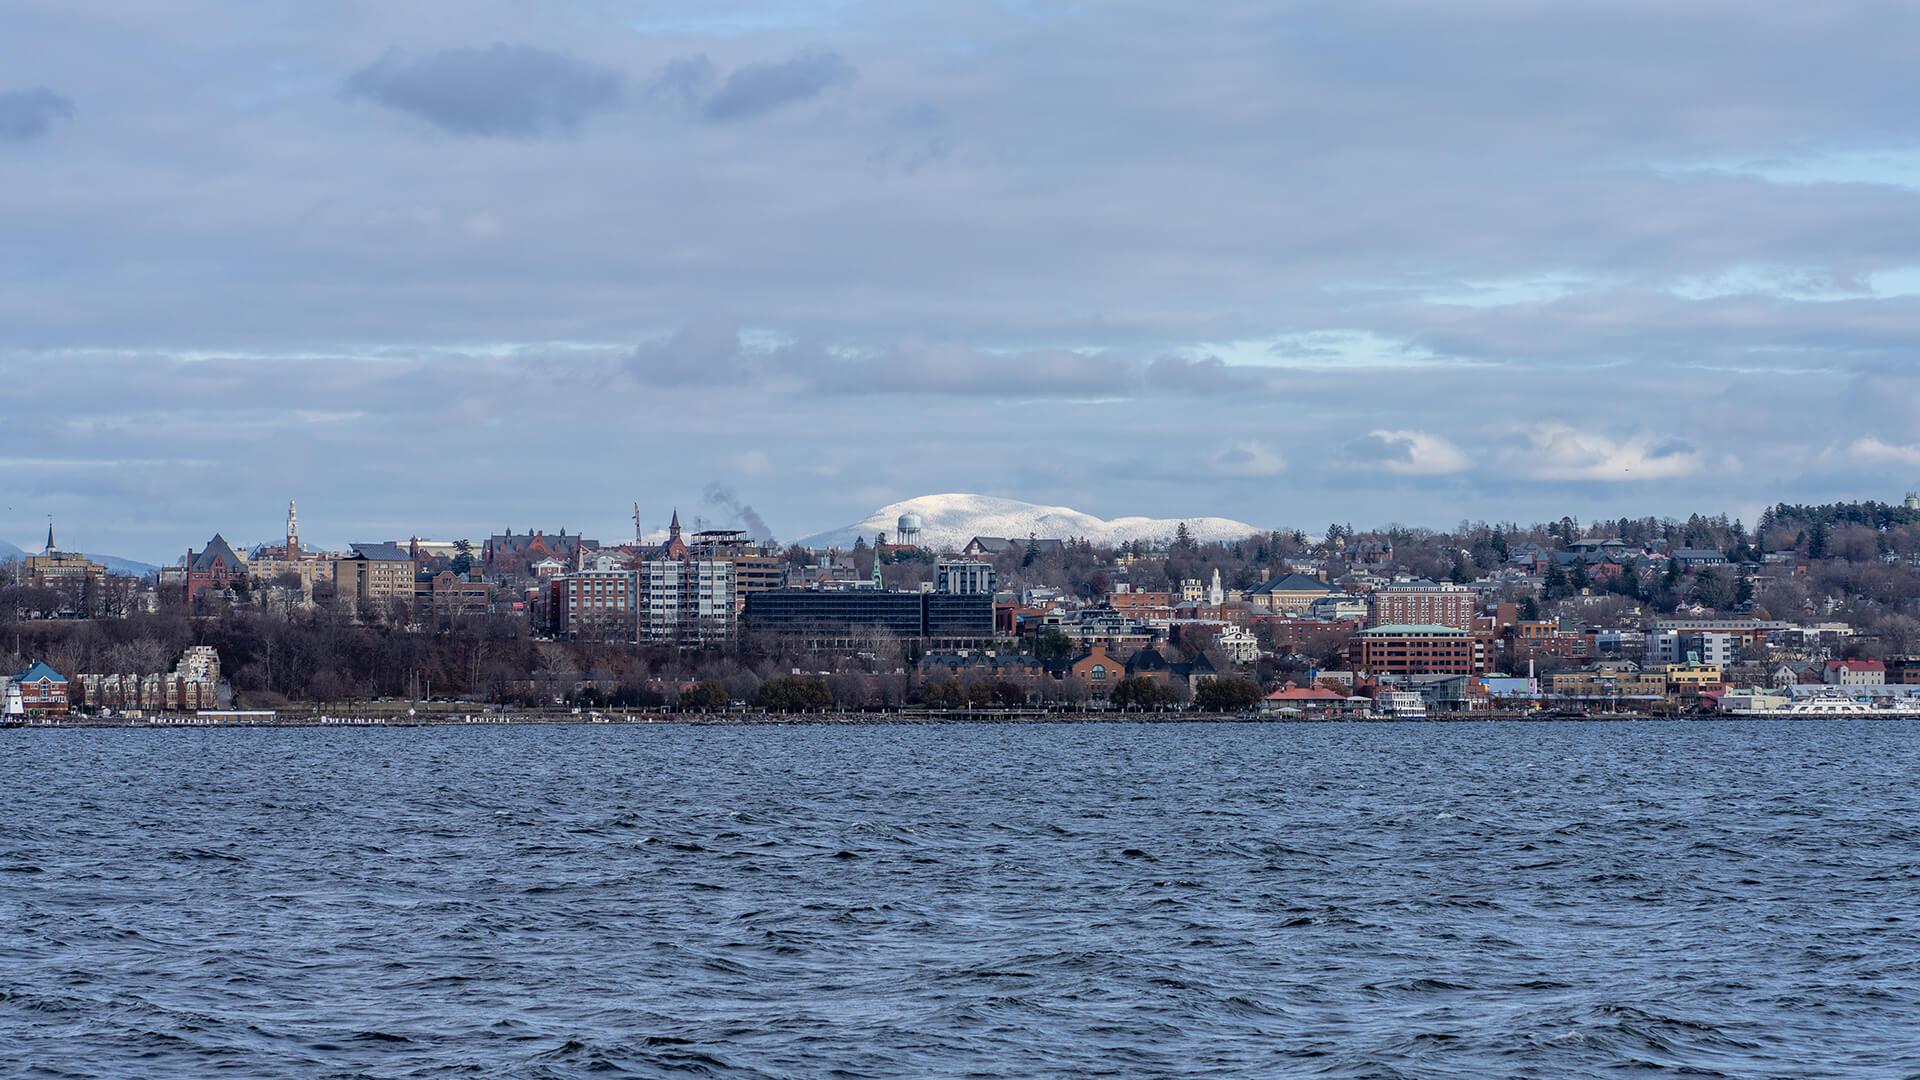 A view of Burlington, Vermont from Lake Champlain